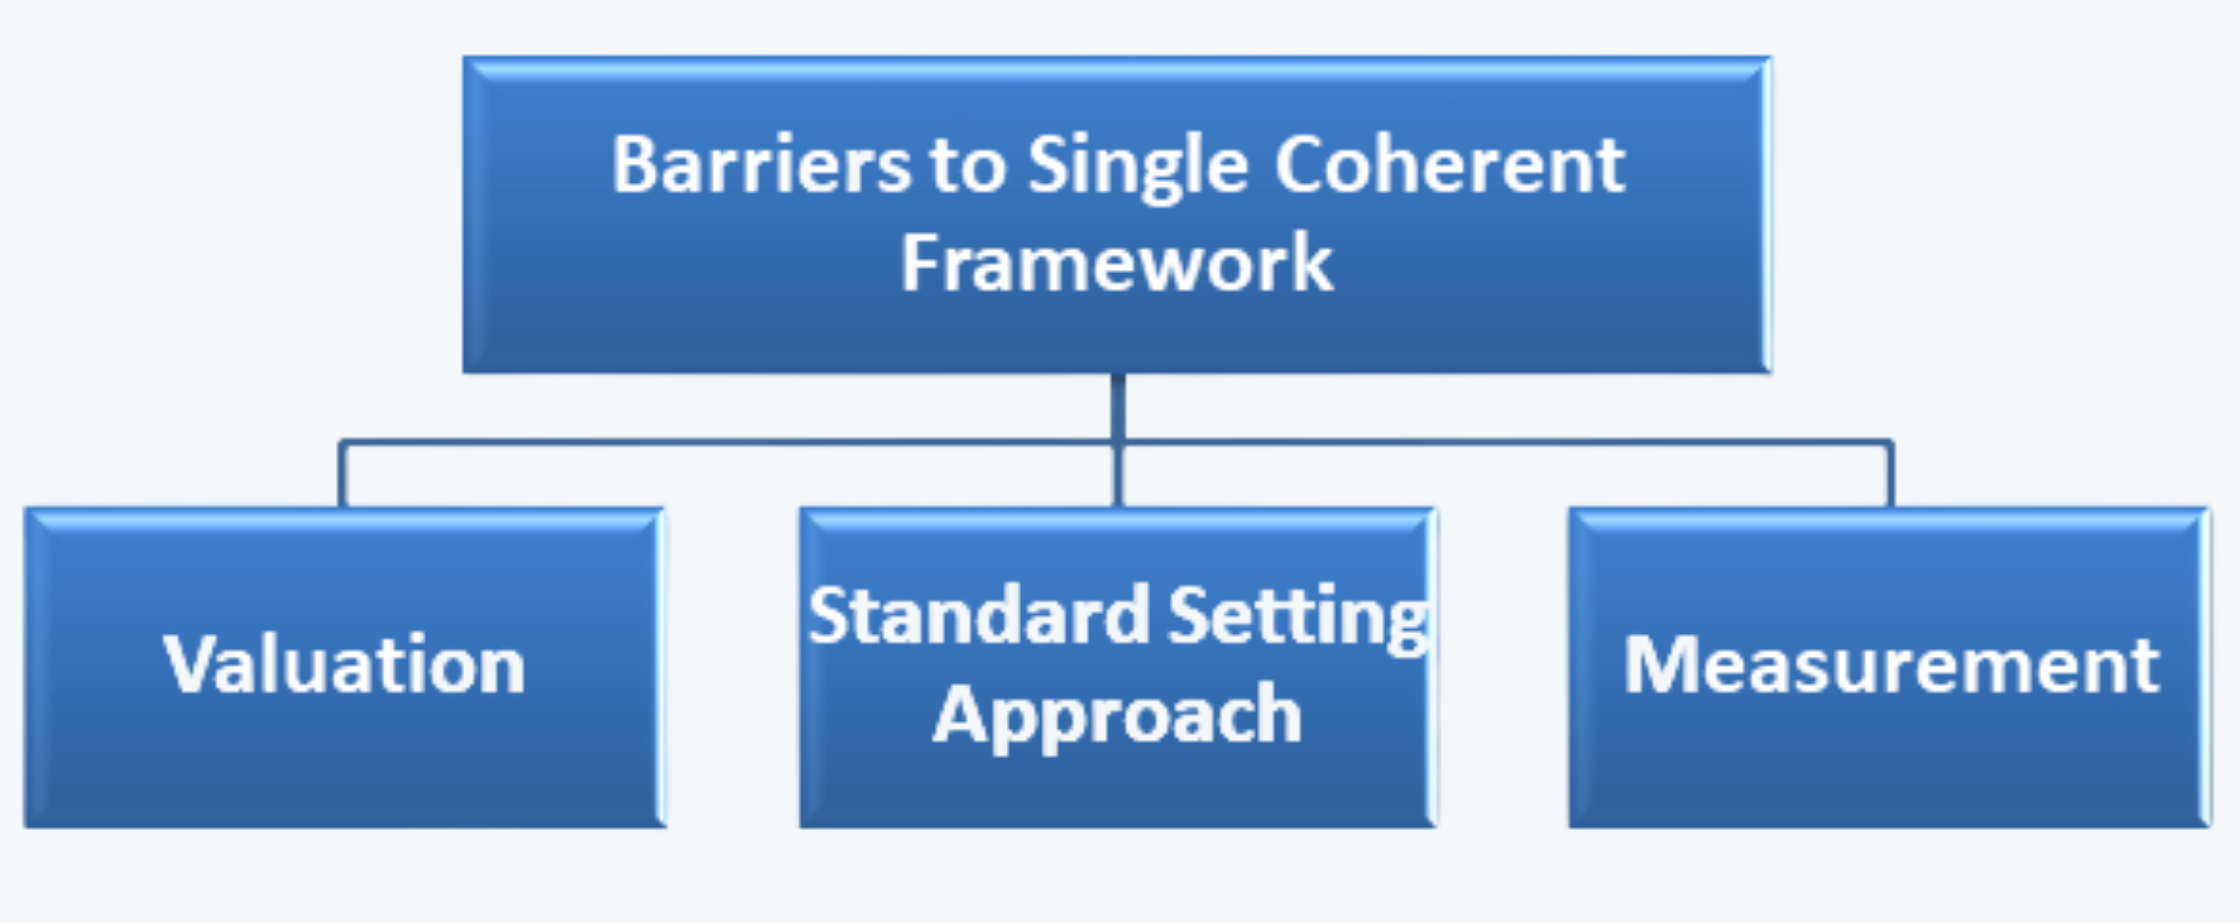 Barriers to Single Coherent Framework FRA CFA Level 1 Study Notes